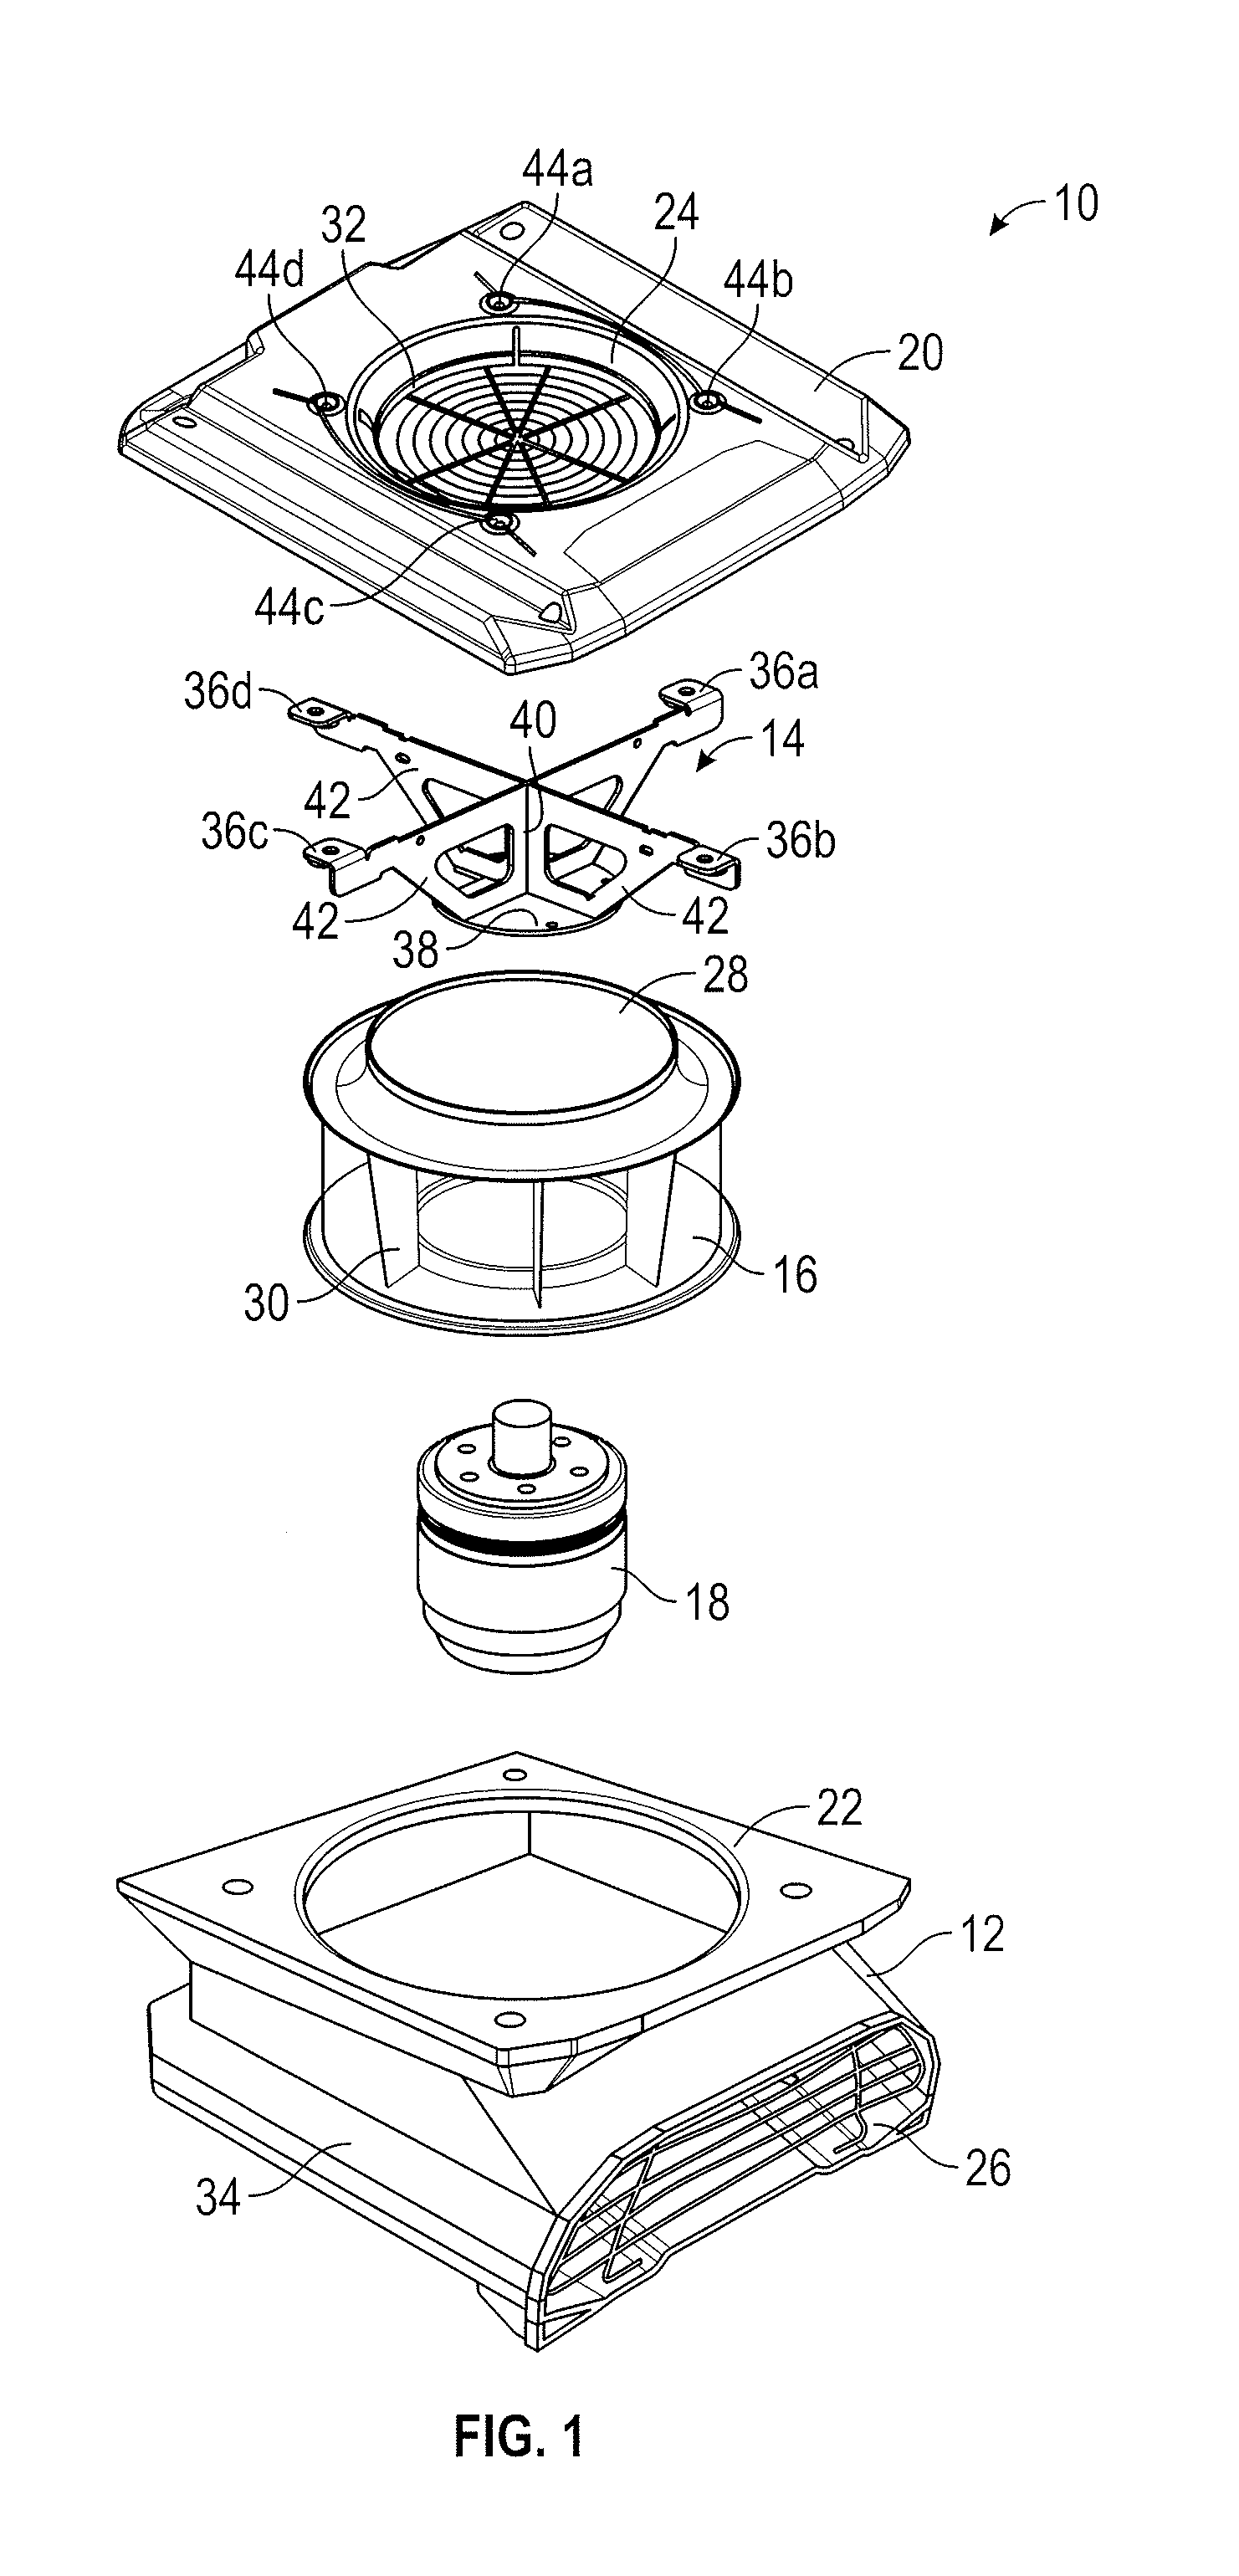 Fan and mounting bracket for an air mover